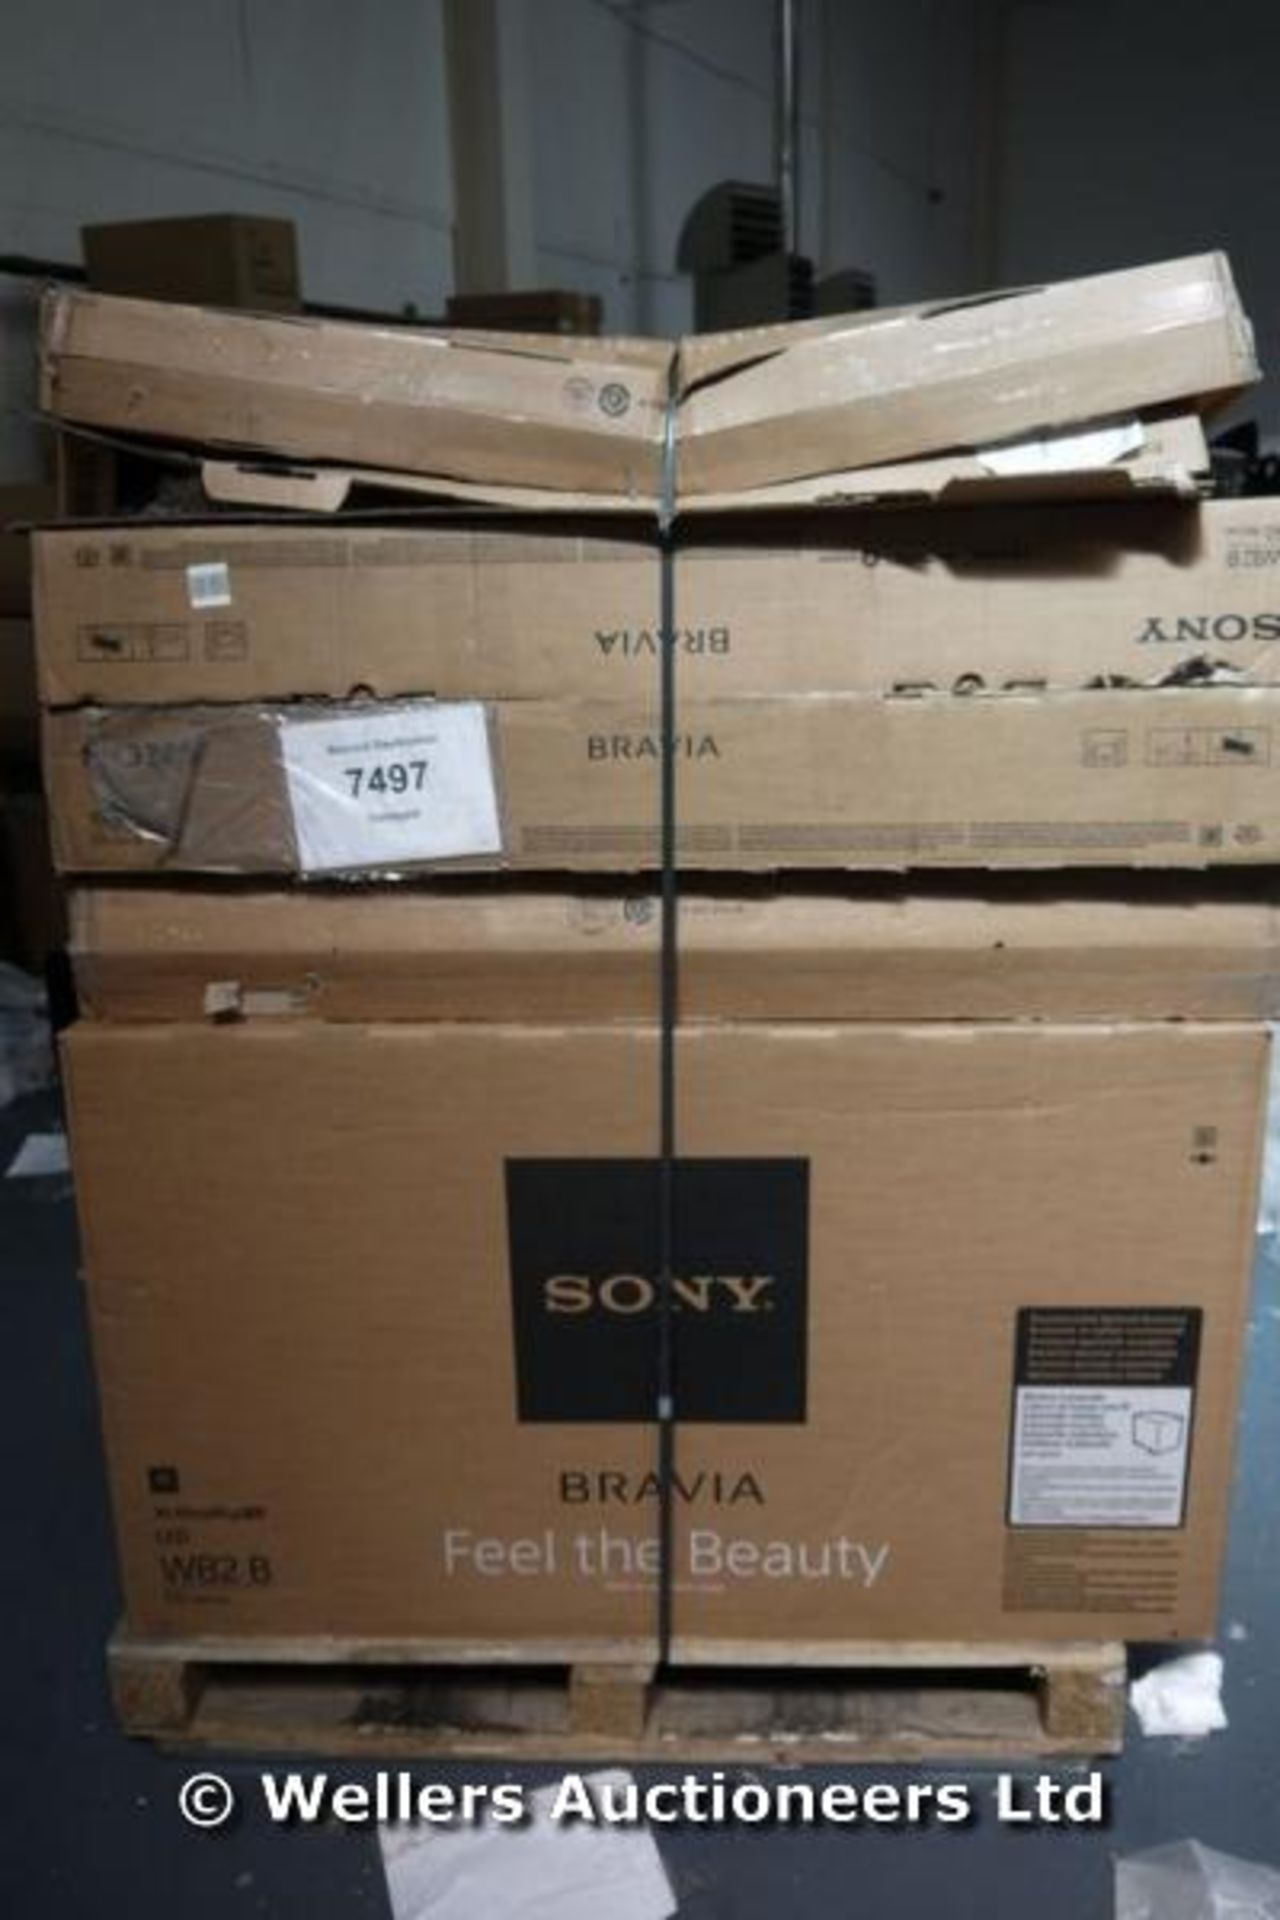 *"PALLET OF 12 X SONY TVS BEYOND ECONOMICAL REPAIR - DAMEGED SCREENS - INCLUDING SONY 55X9005 55" 4K - Image 2 of 4